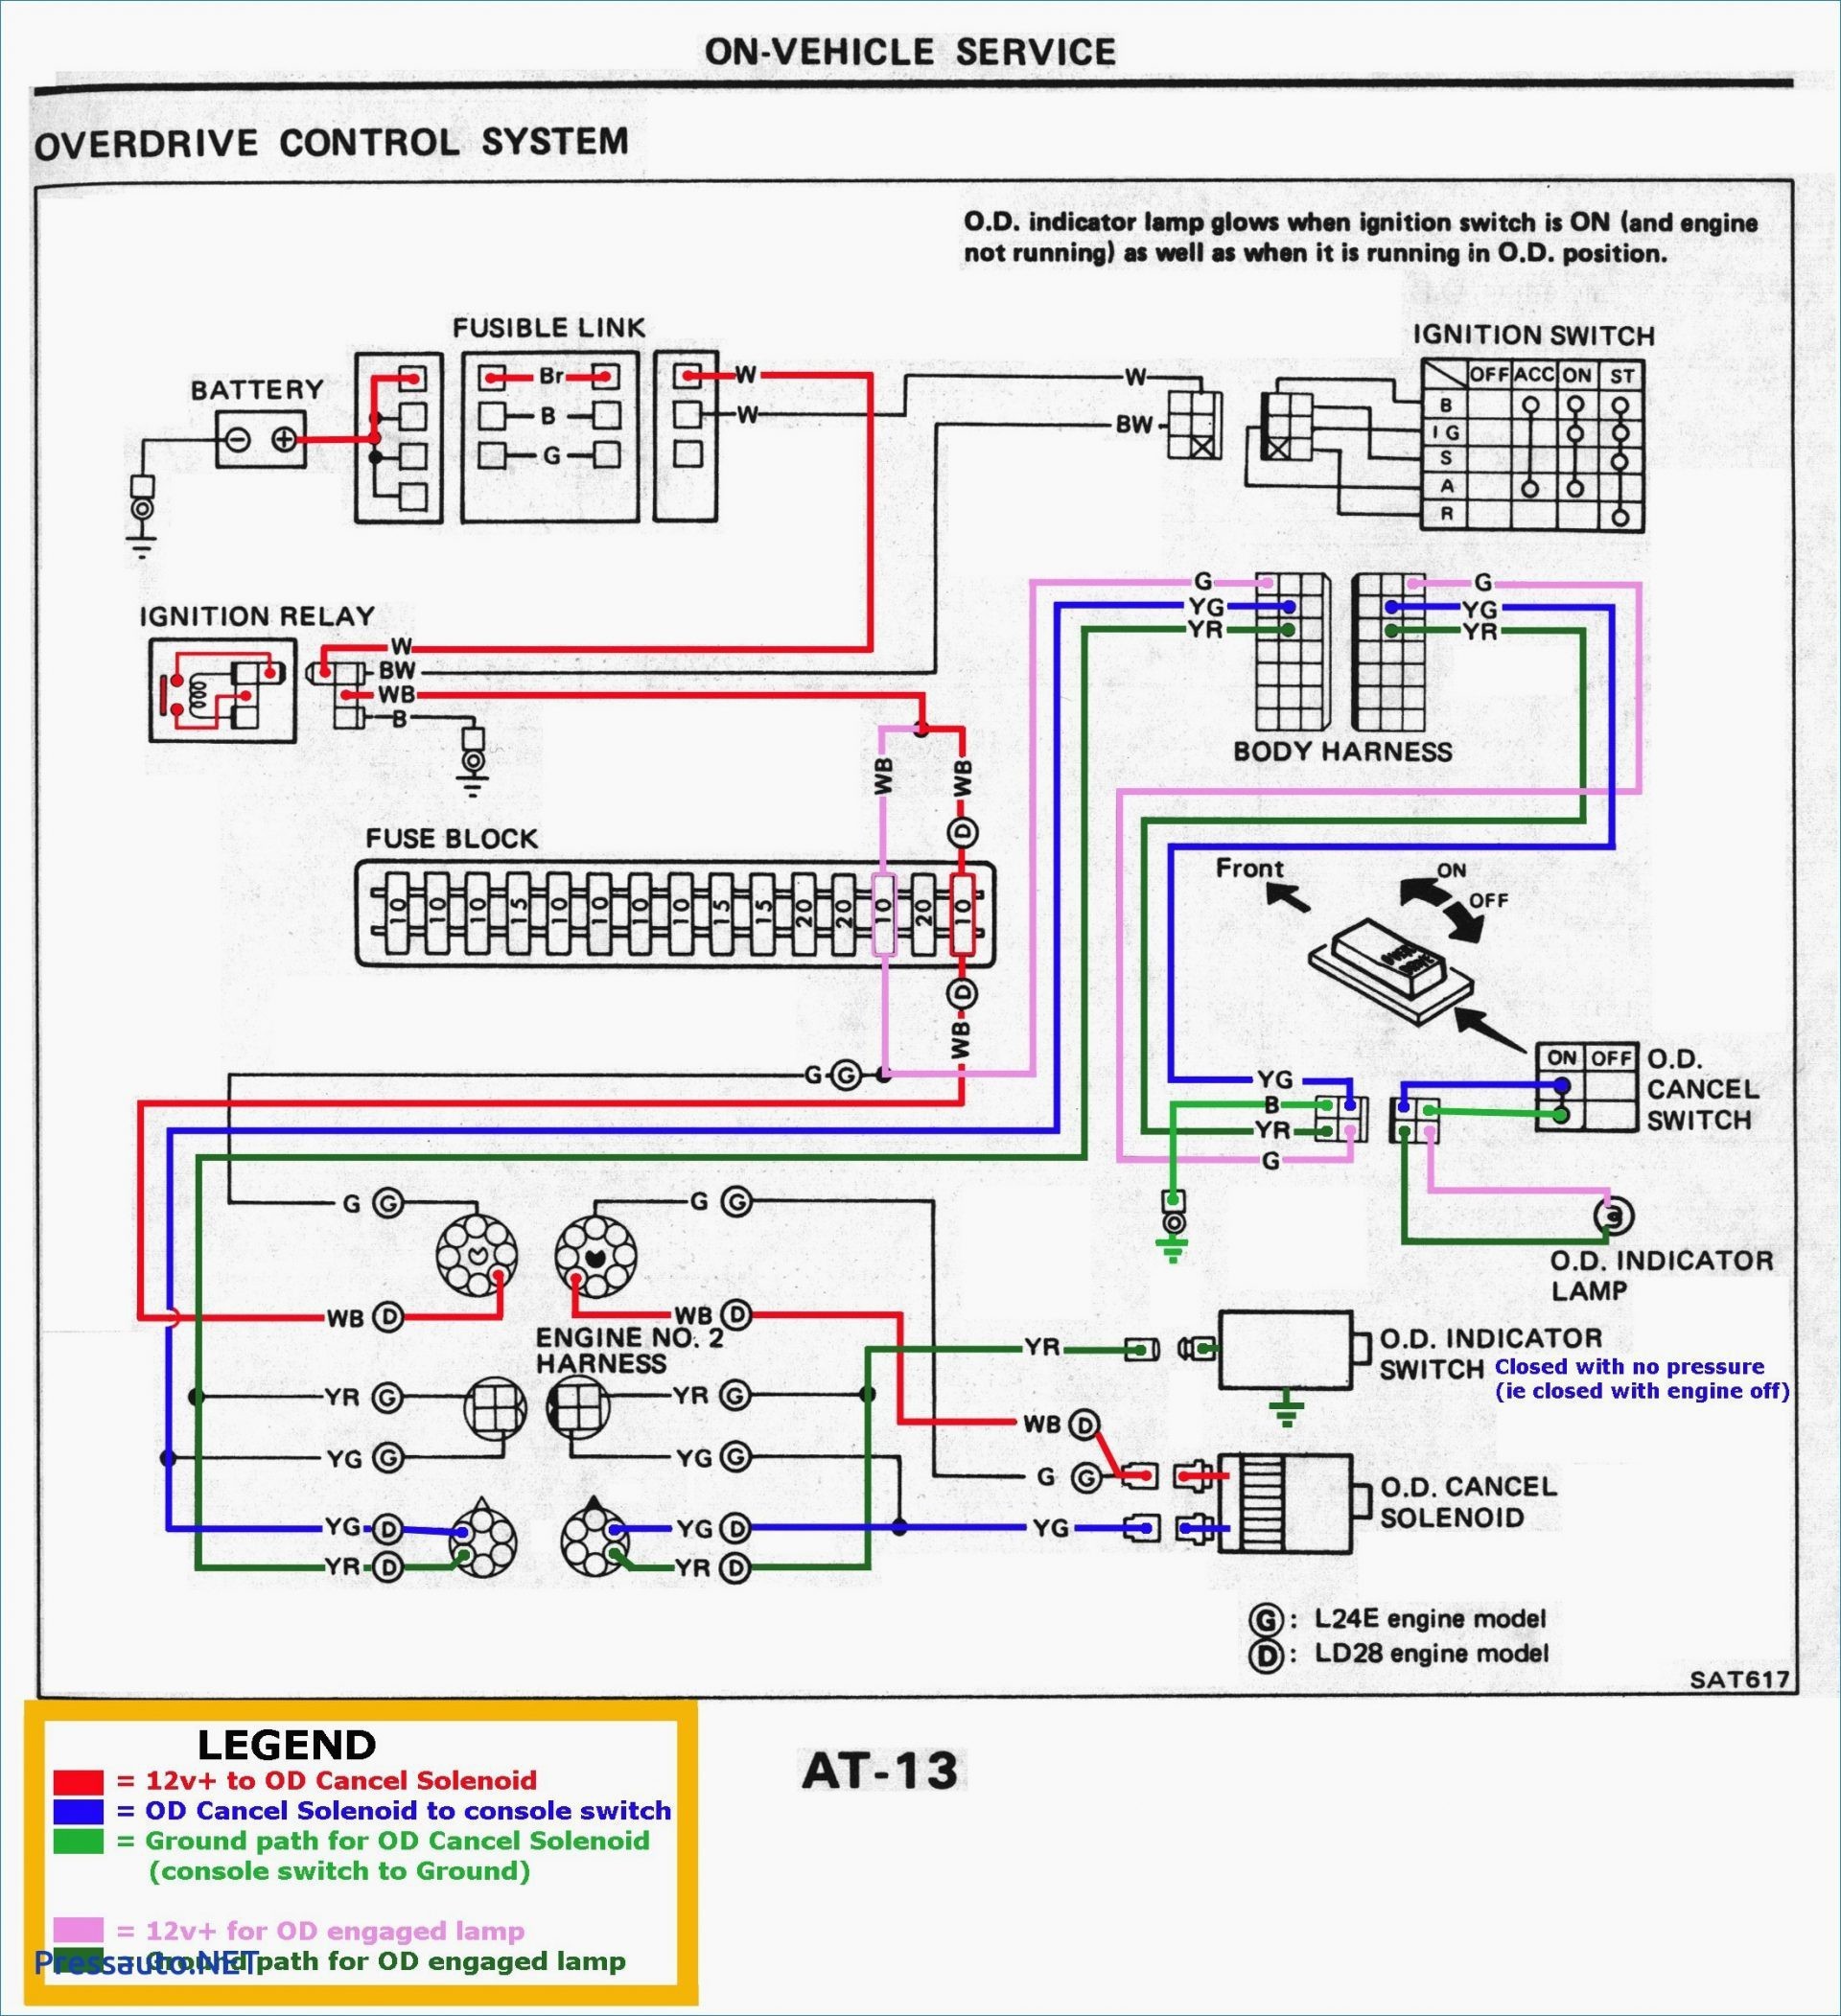 2009 ford Escape Engine Diagram 2002 Prius Engine Diagram Another Blog About Wiring Diagram • Of 2009 ford Escape Engine Diagram